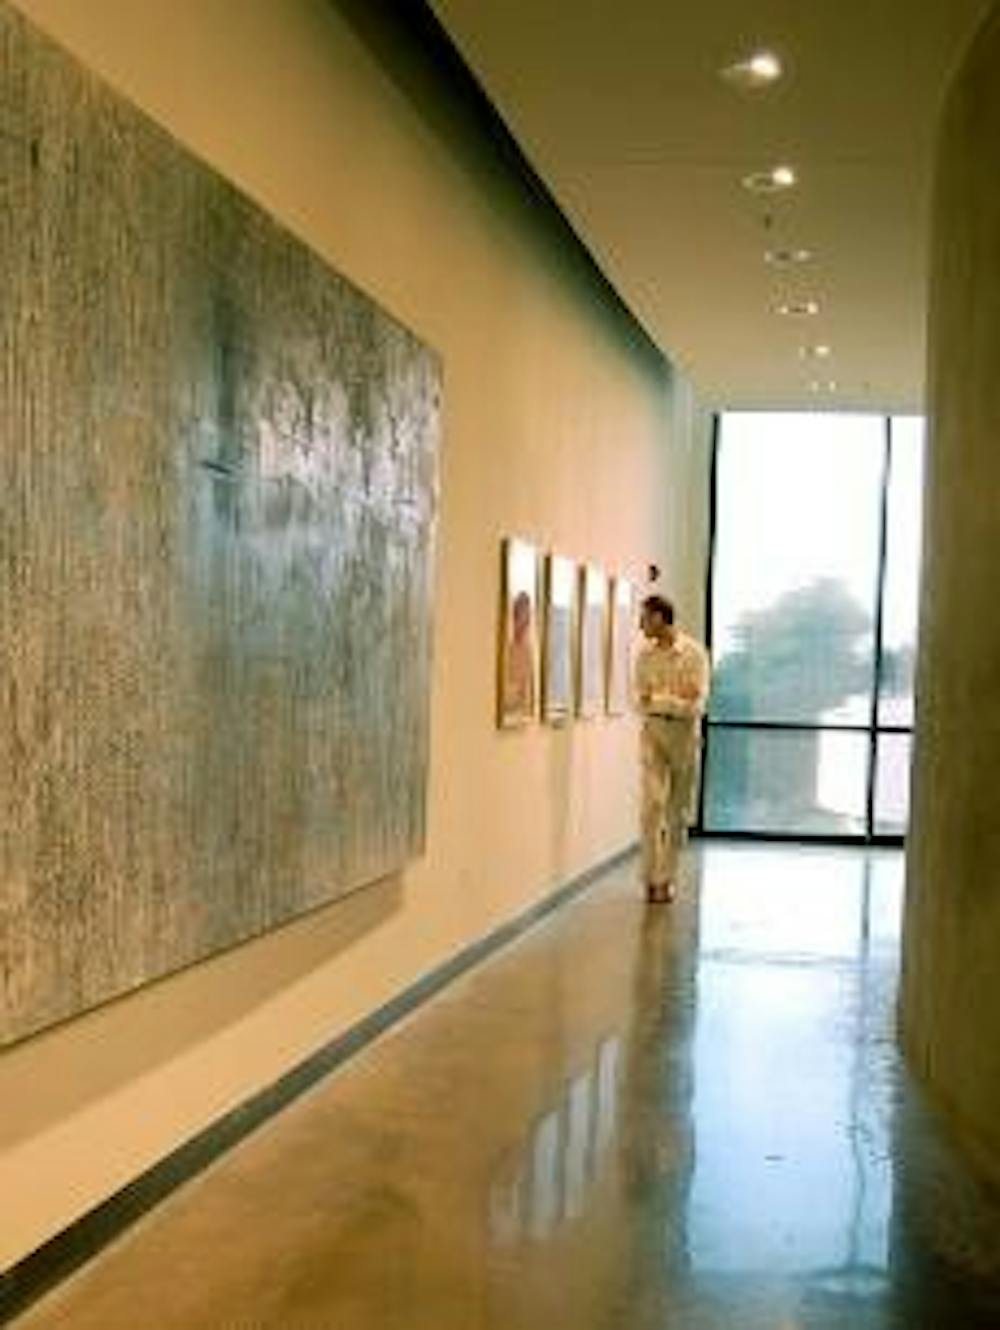 NEW ART - A visitor views the new exhibits at the Katzen Arts Center, including "All in the Family: A Juried Show of American University Alumni;" "Songs Without Words," an exhibit of photography by Sophia Tolstoy;  "Listening to Ivy;" and "Topophilia Imbu